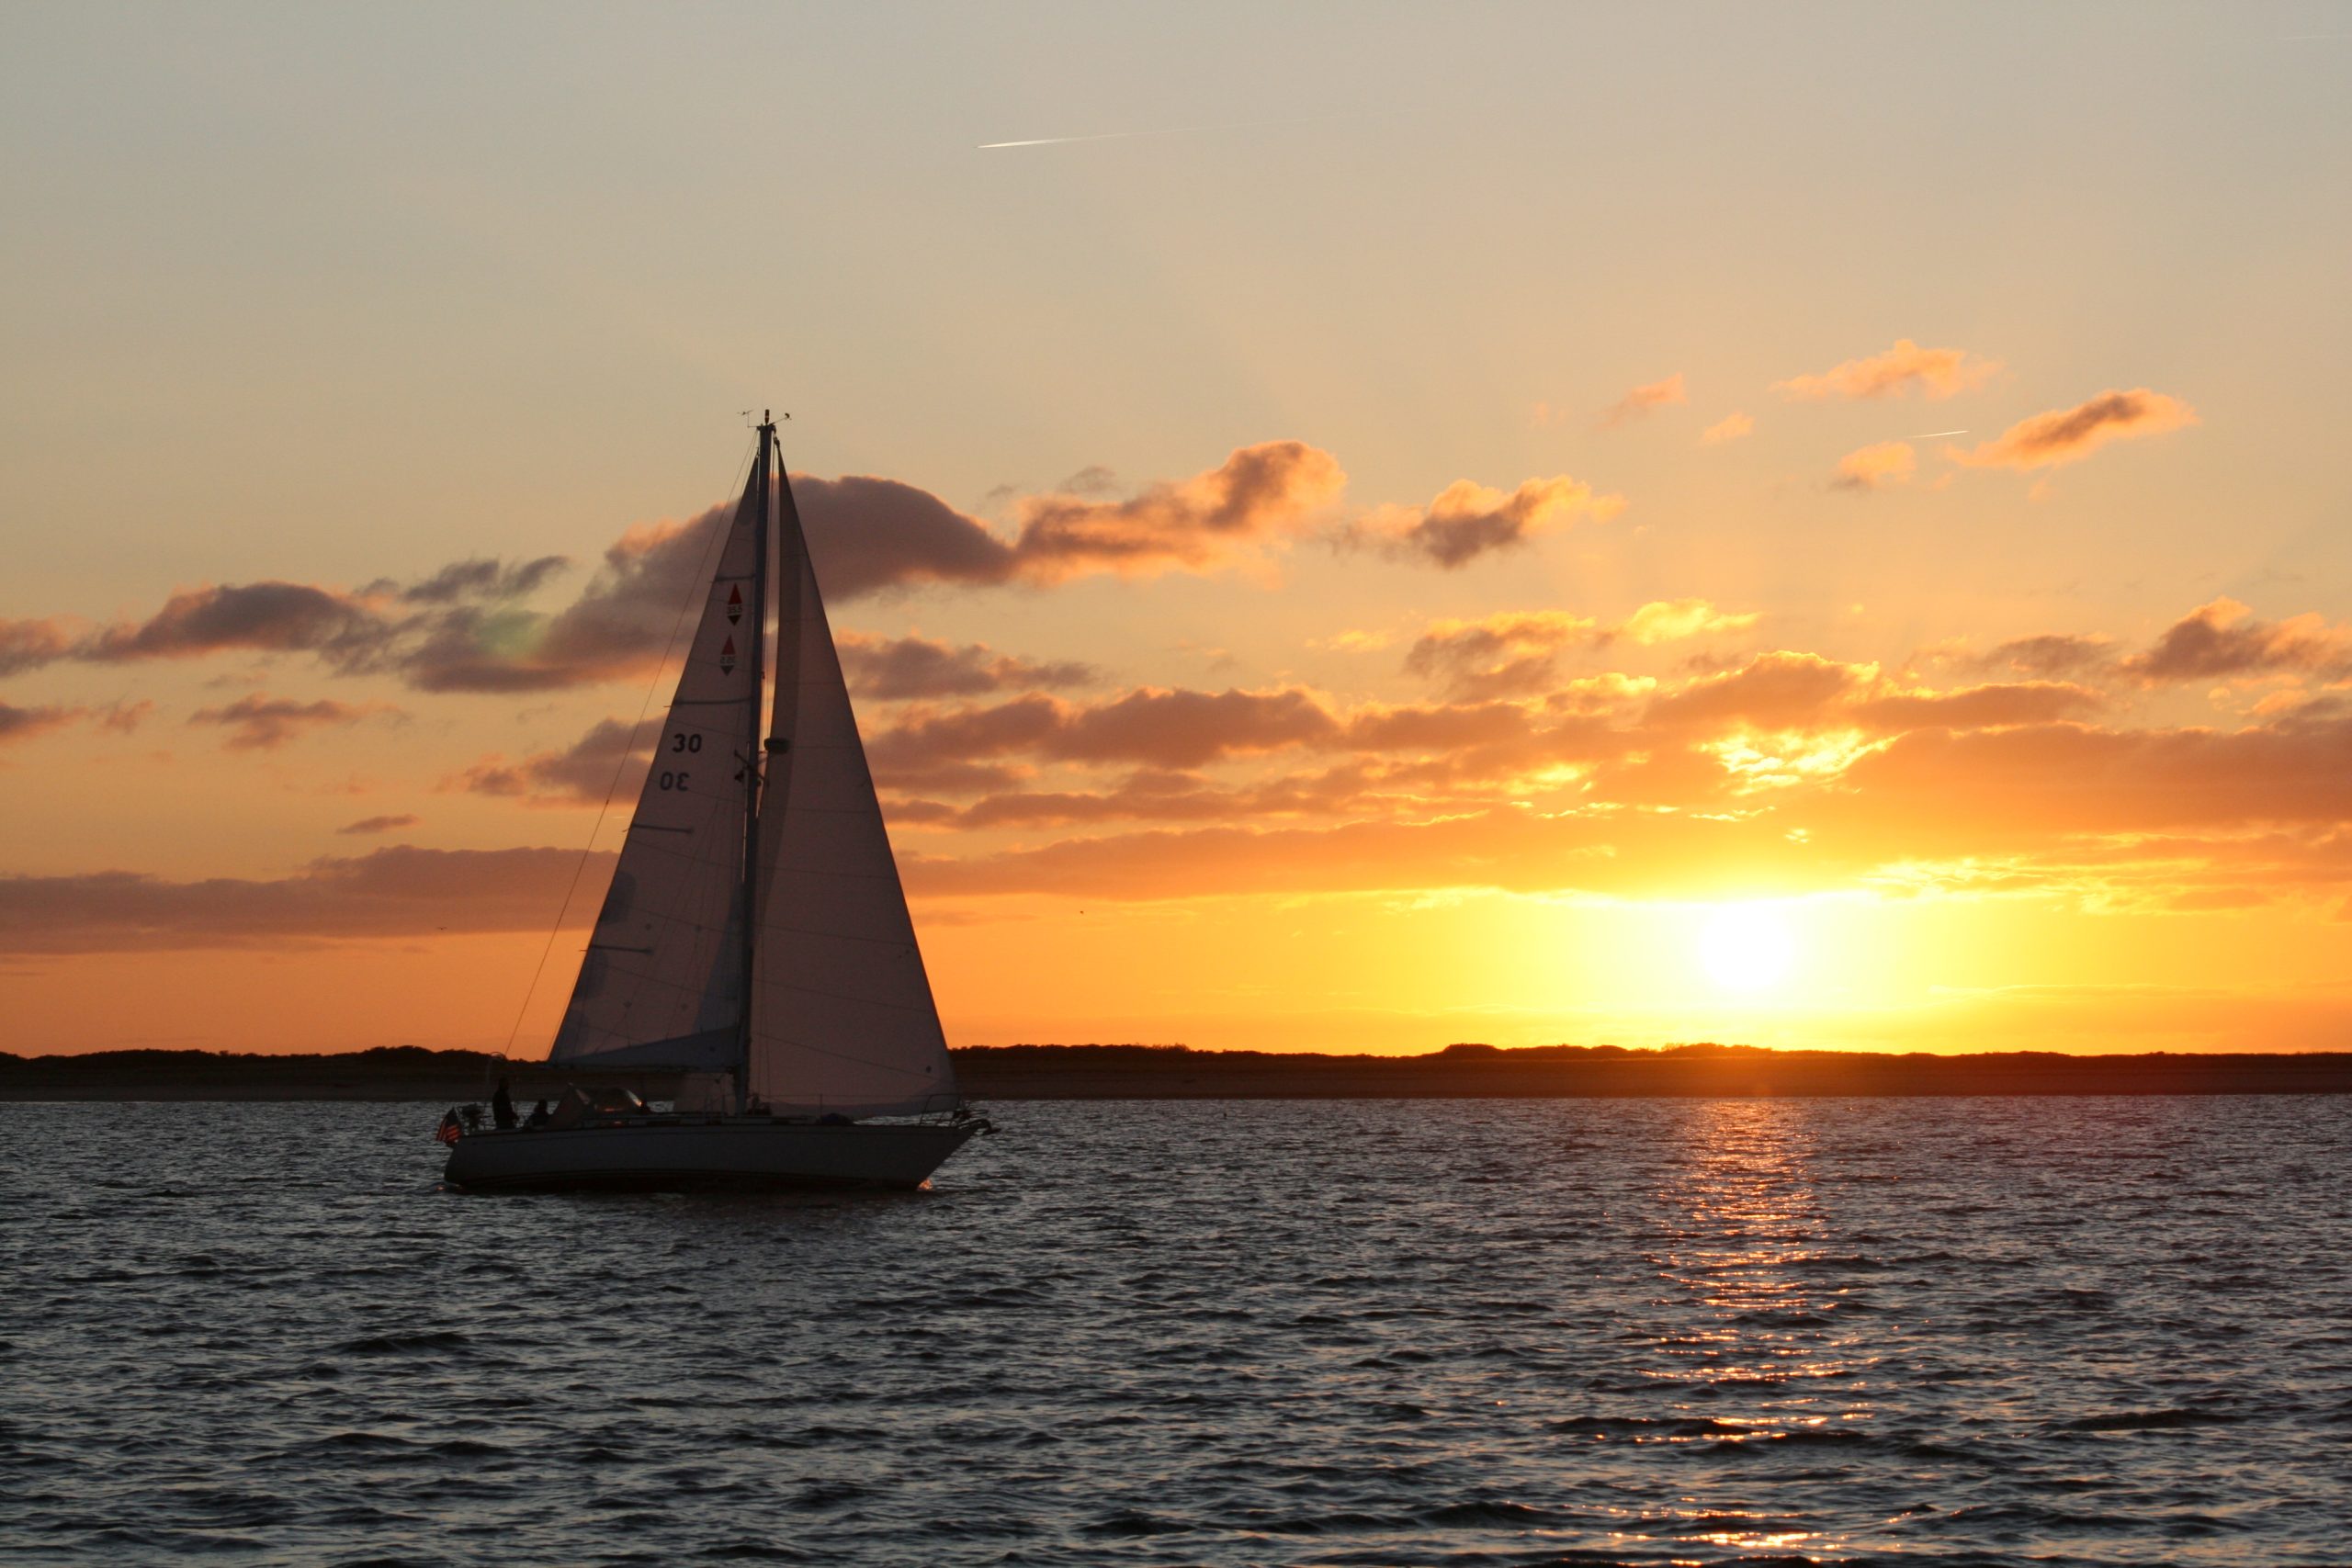 Sunset Sailboat In Orleans (user submitted)